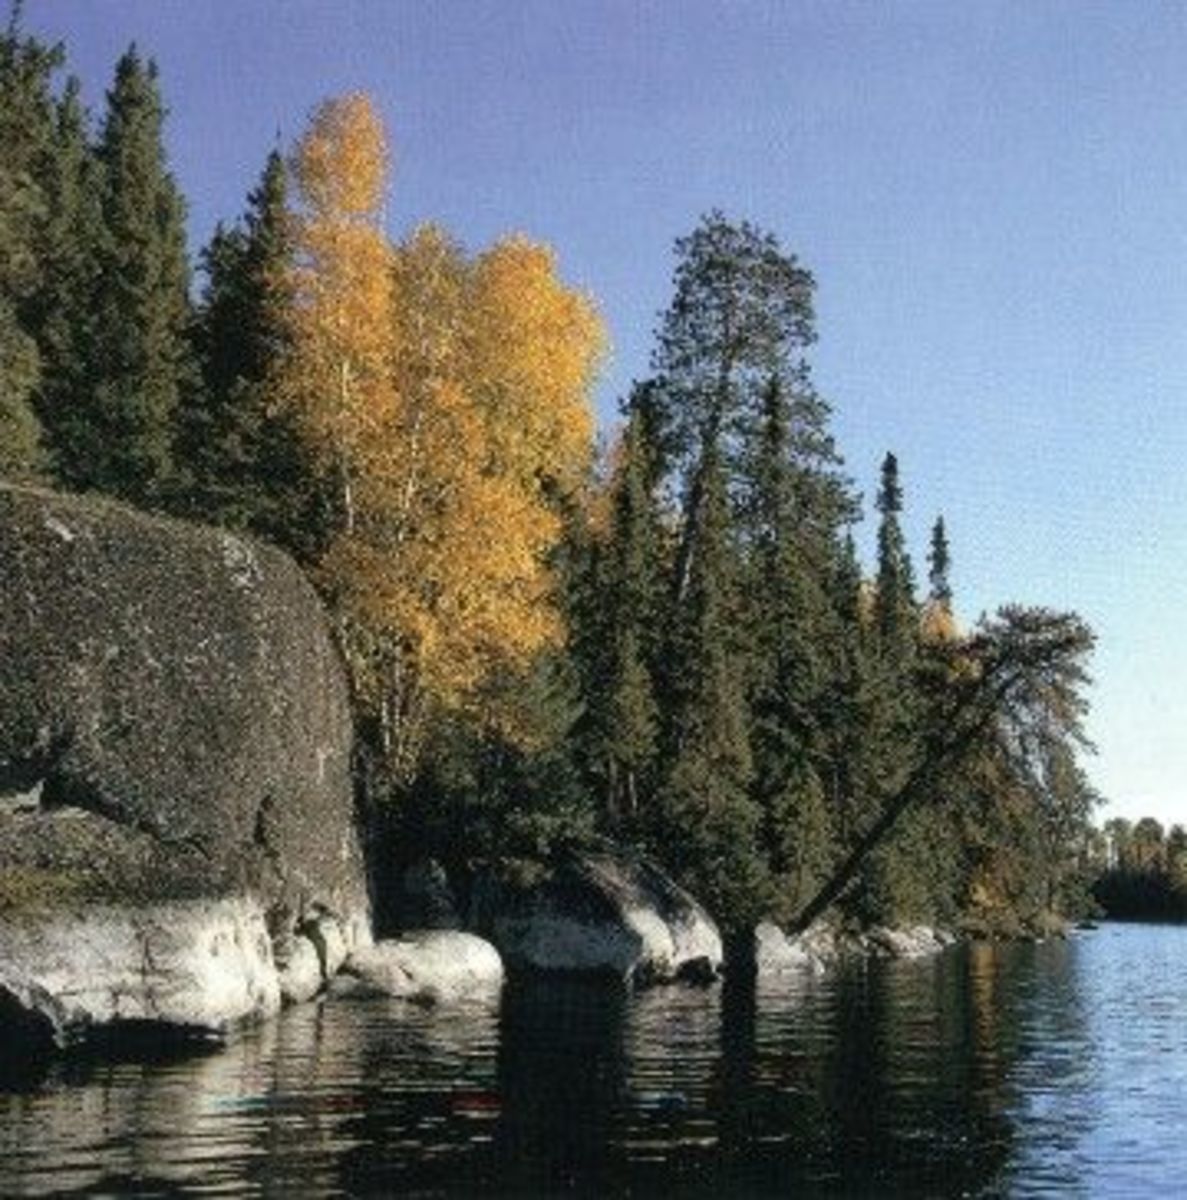 Planning A Canoe Camping Trip In The Boundary Waters